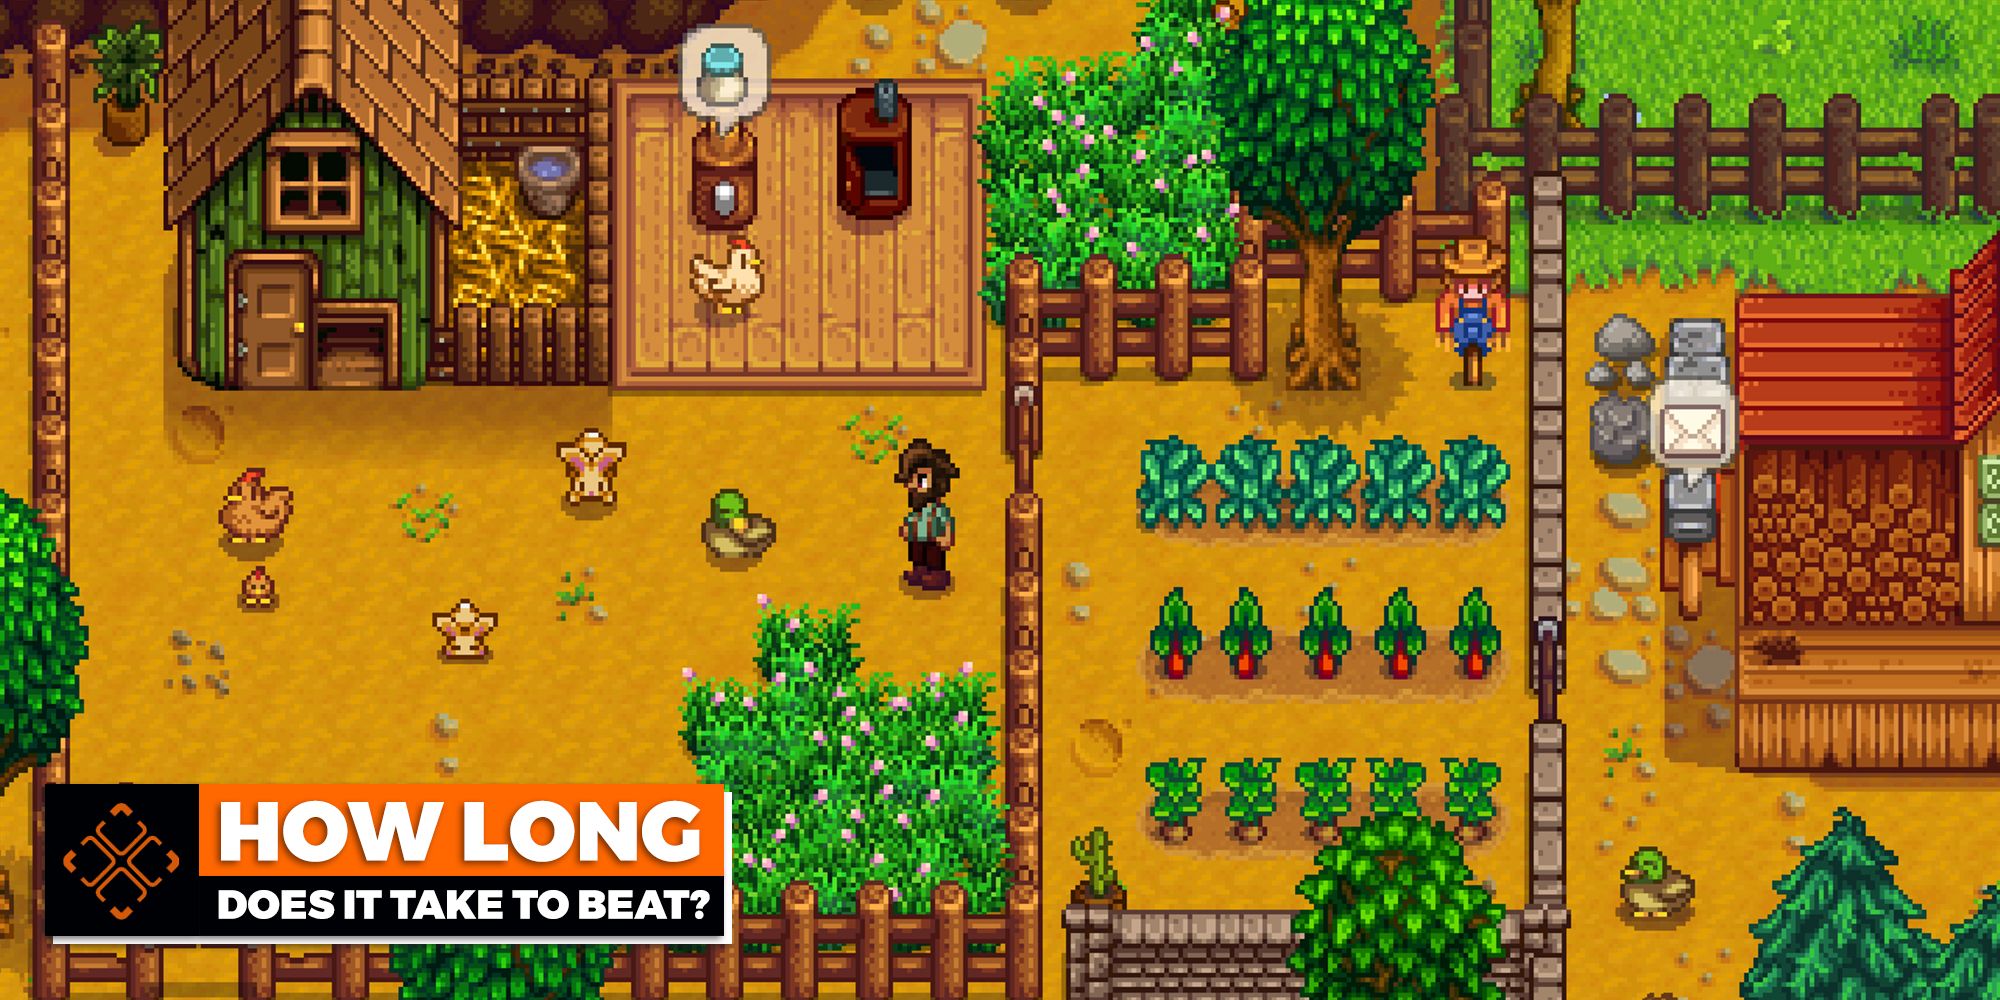 Game screen from Stardew Valley.